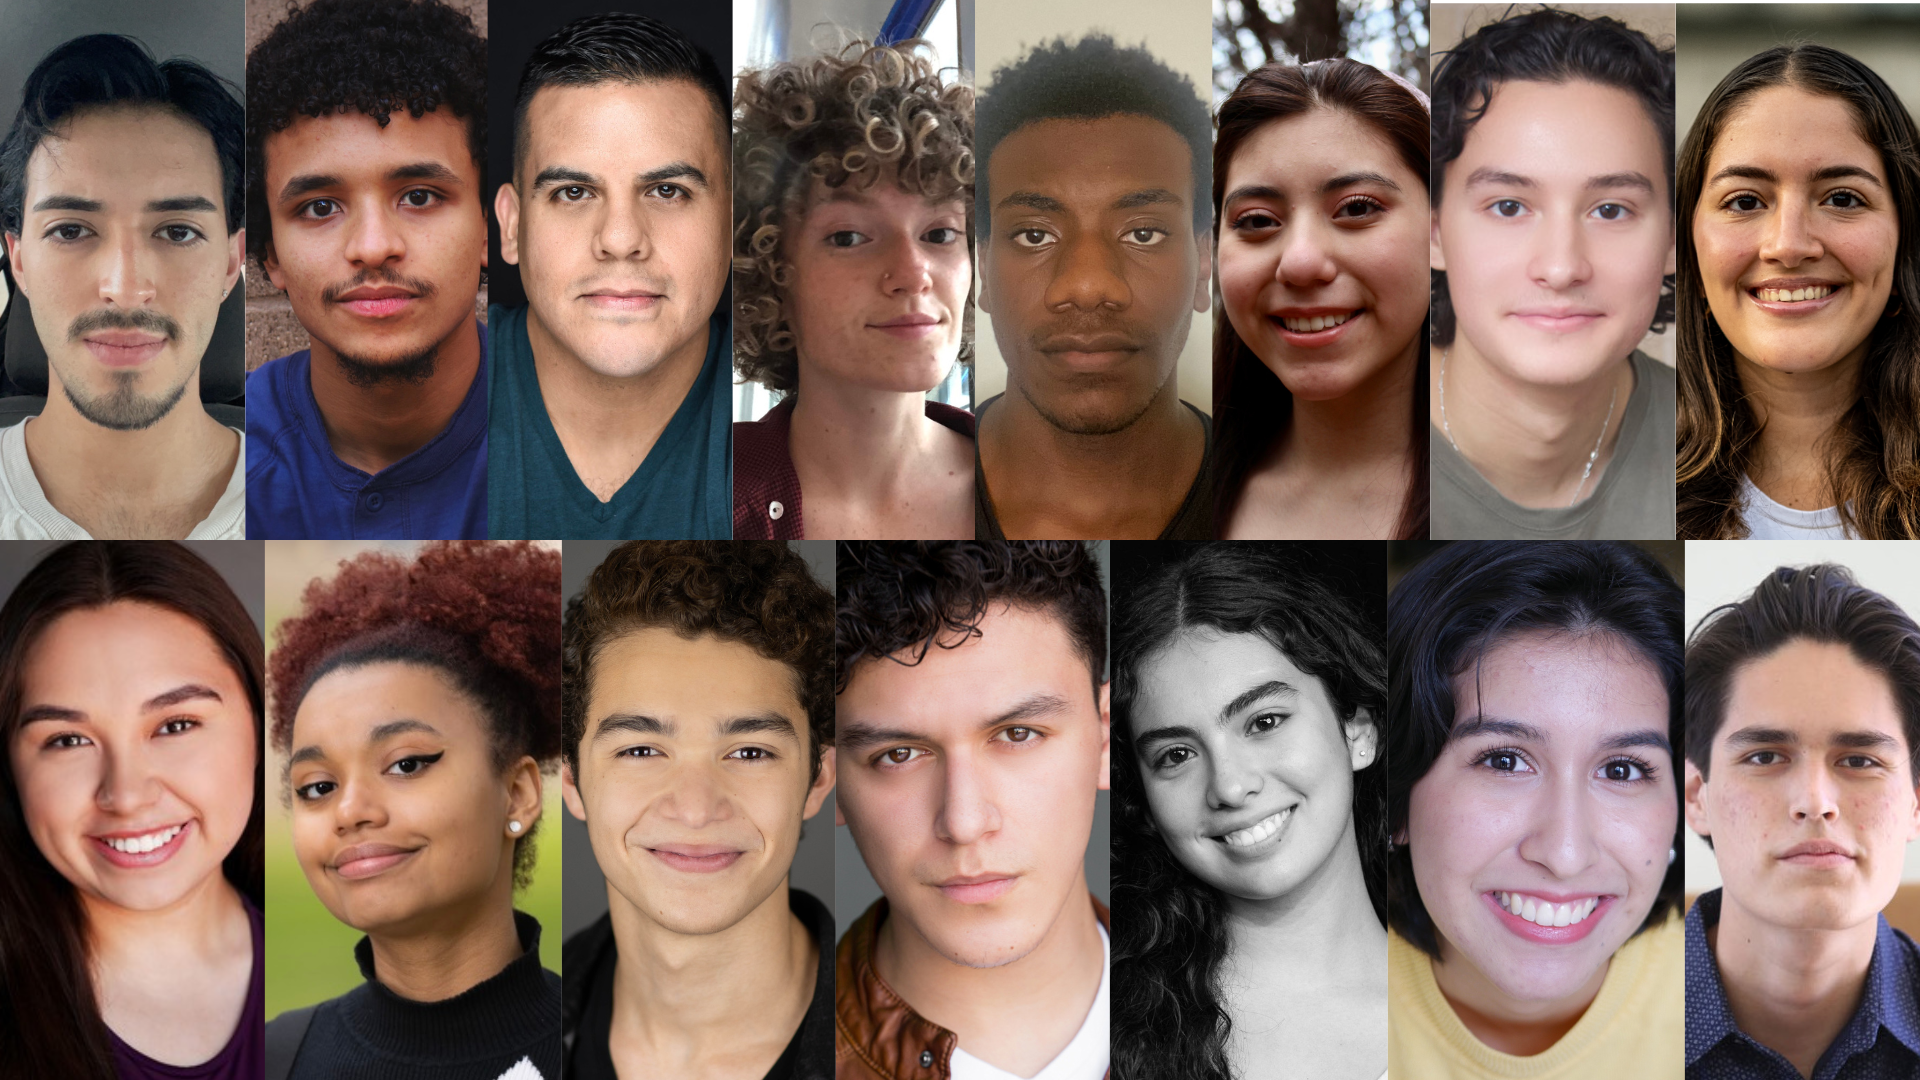 Pictured is the cast of Romeo y Juliet, arranged in two horizontal rows with 8 headshots in the first and 7 in the second.